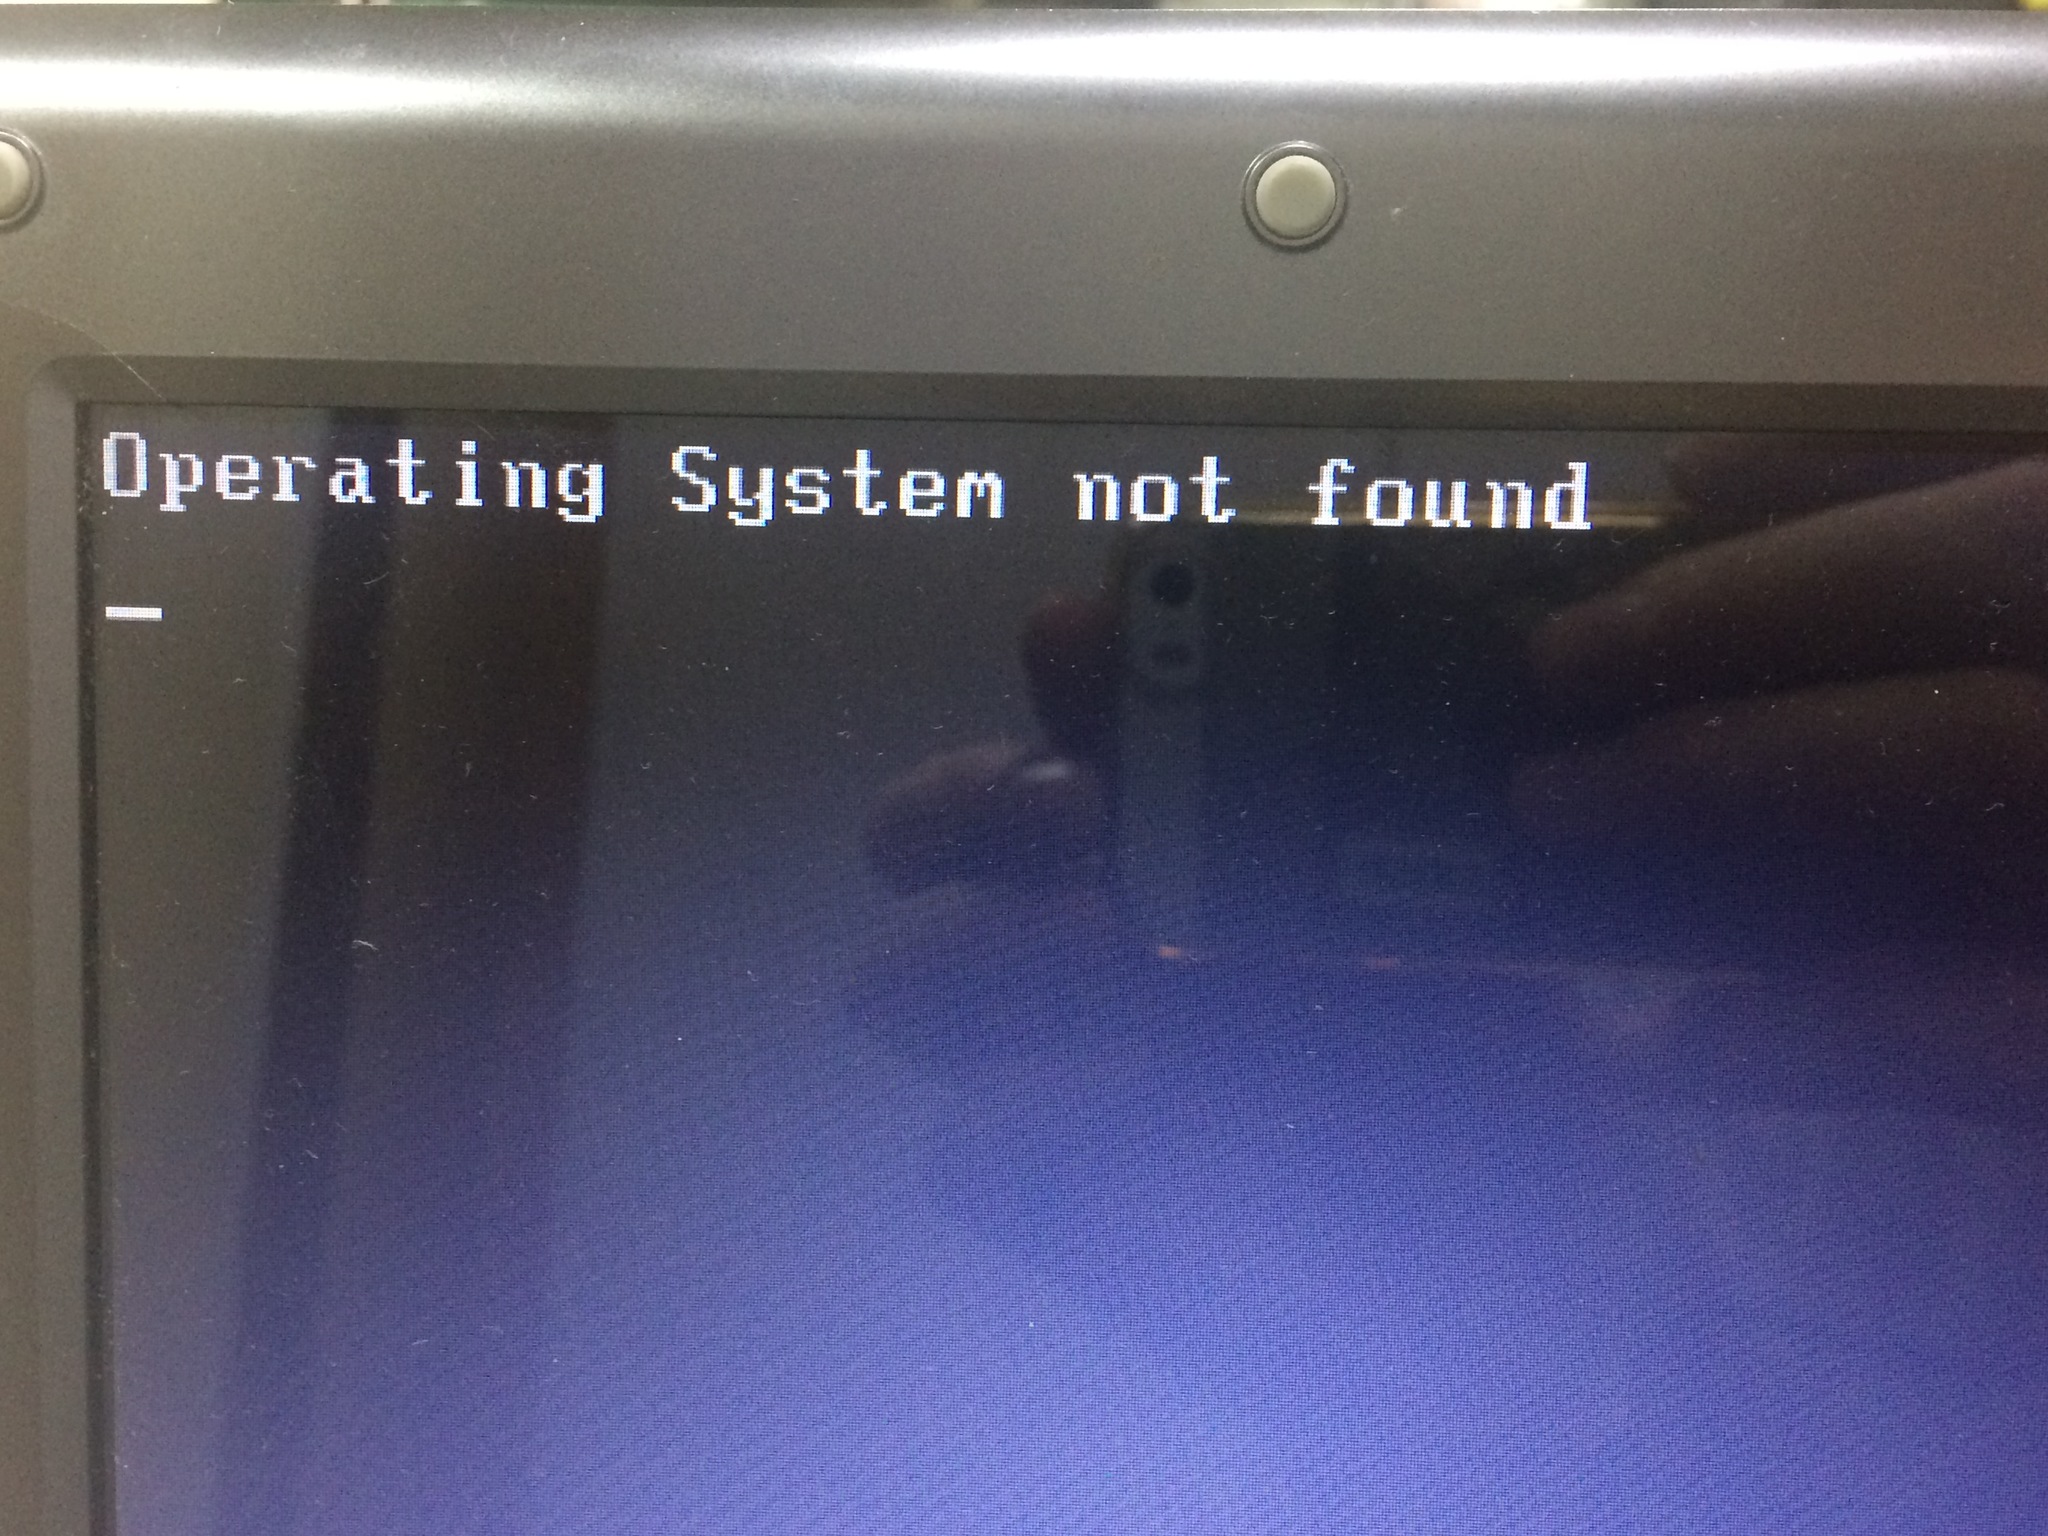 System is not available. Operating System not found на ноутбуке. Operating System not found на ноутбуке Samsung. Operating System not found на синем фоне. Operation System not found.